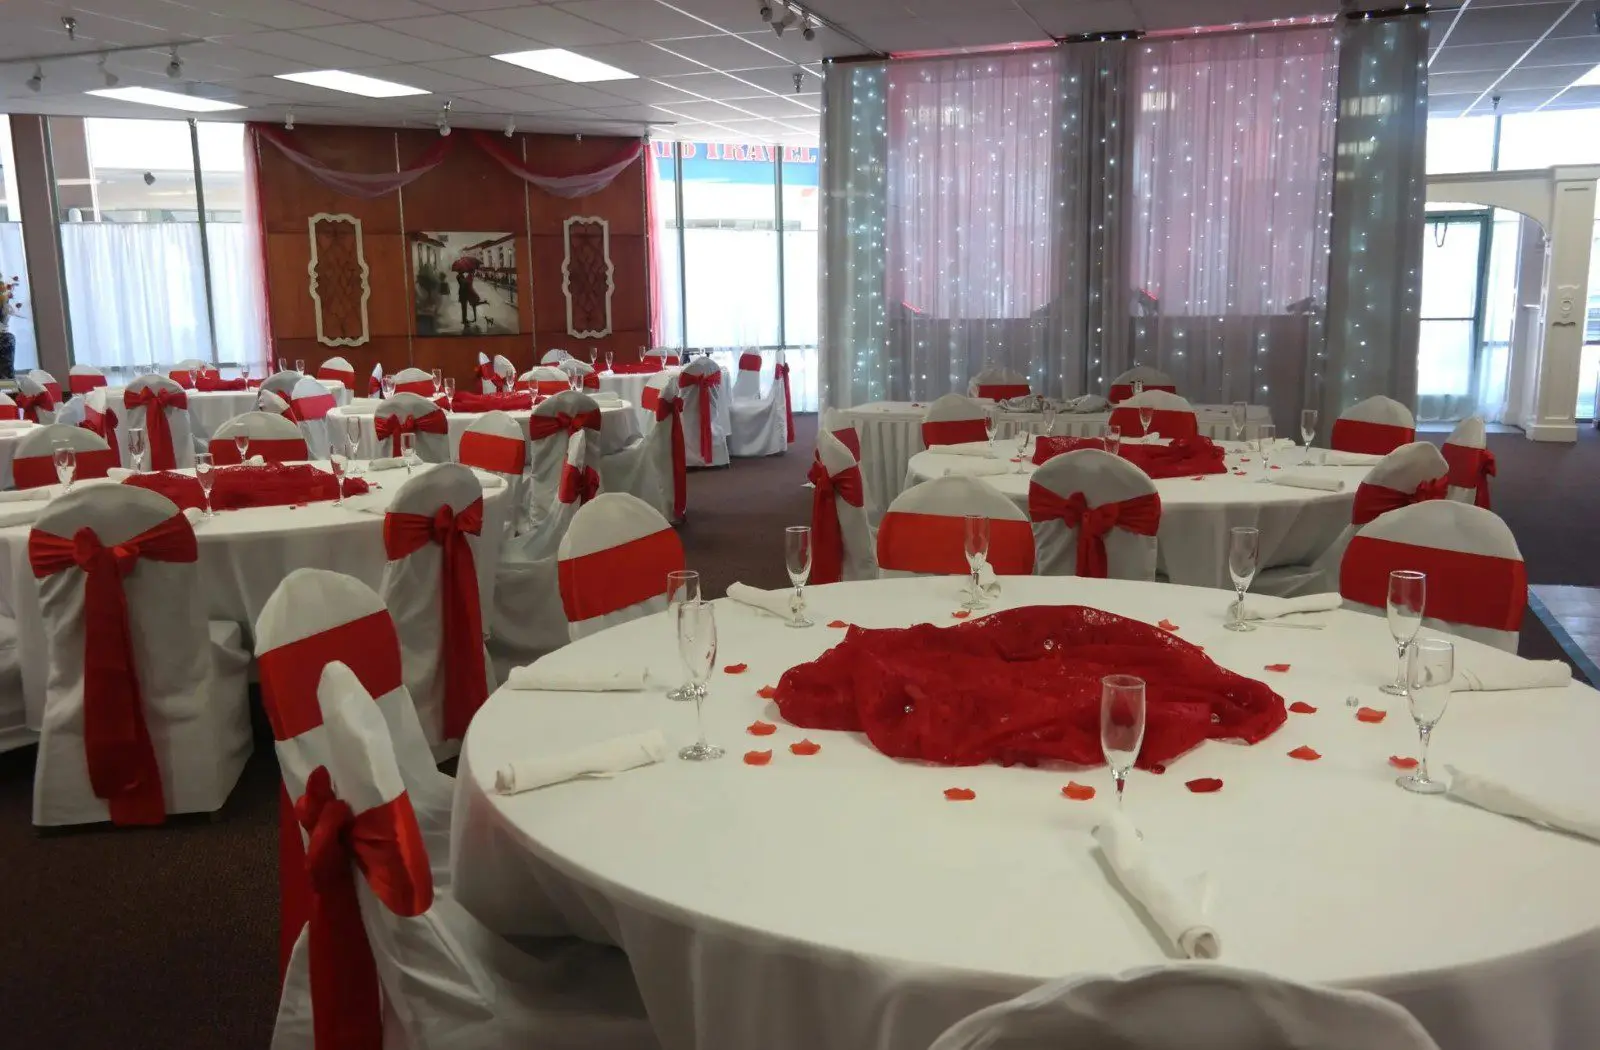 A room with many tables and chairs covered in red roses.